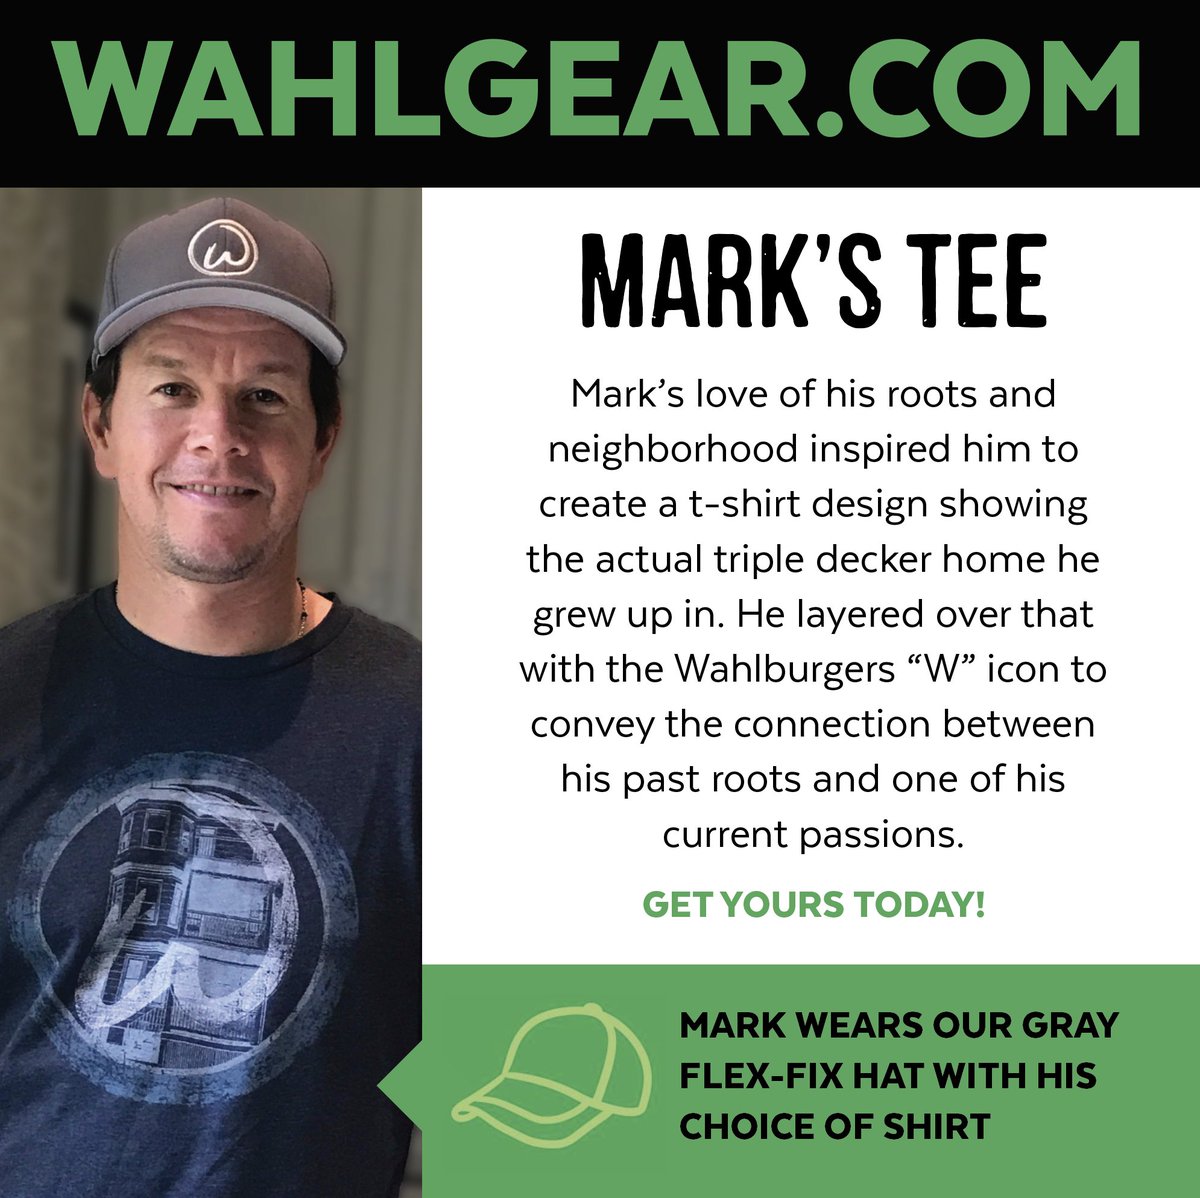 RT @Wahlburgers: Time to shop for some Wahlgear!  https://t.co/QQ0NFuaTfb https://t.co/D47g8UK6Eu